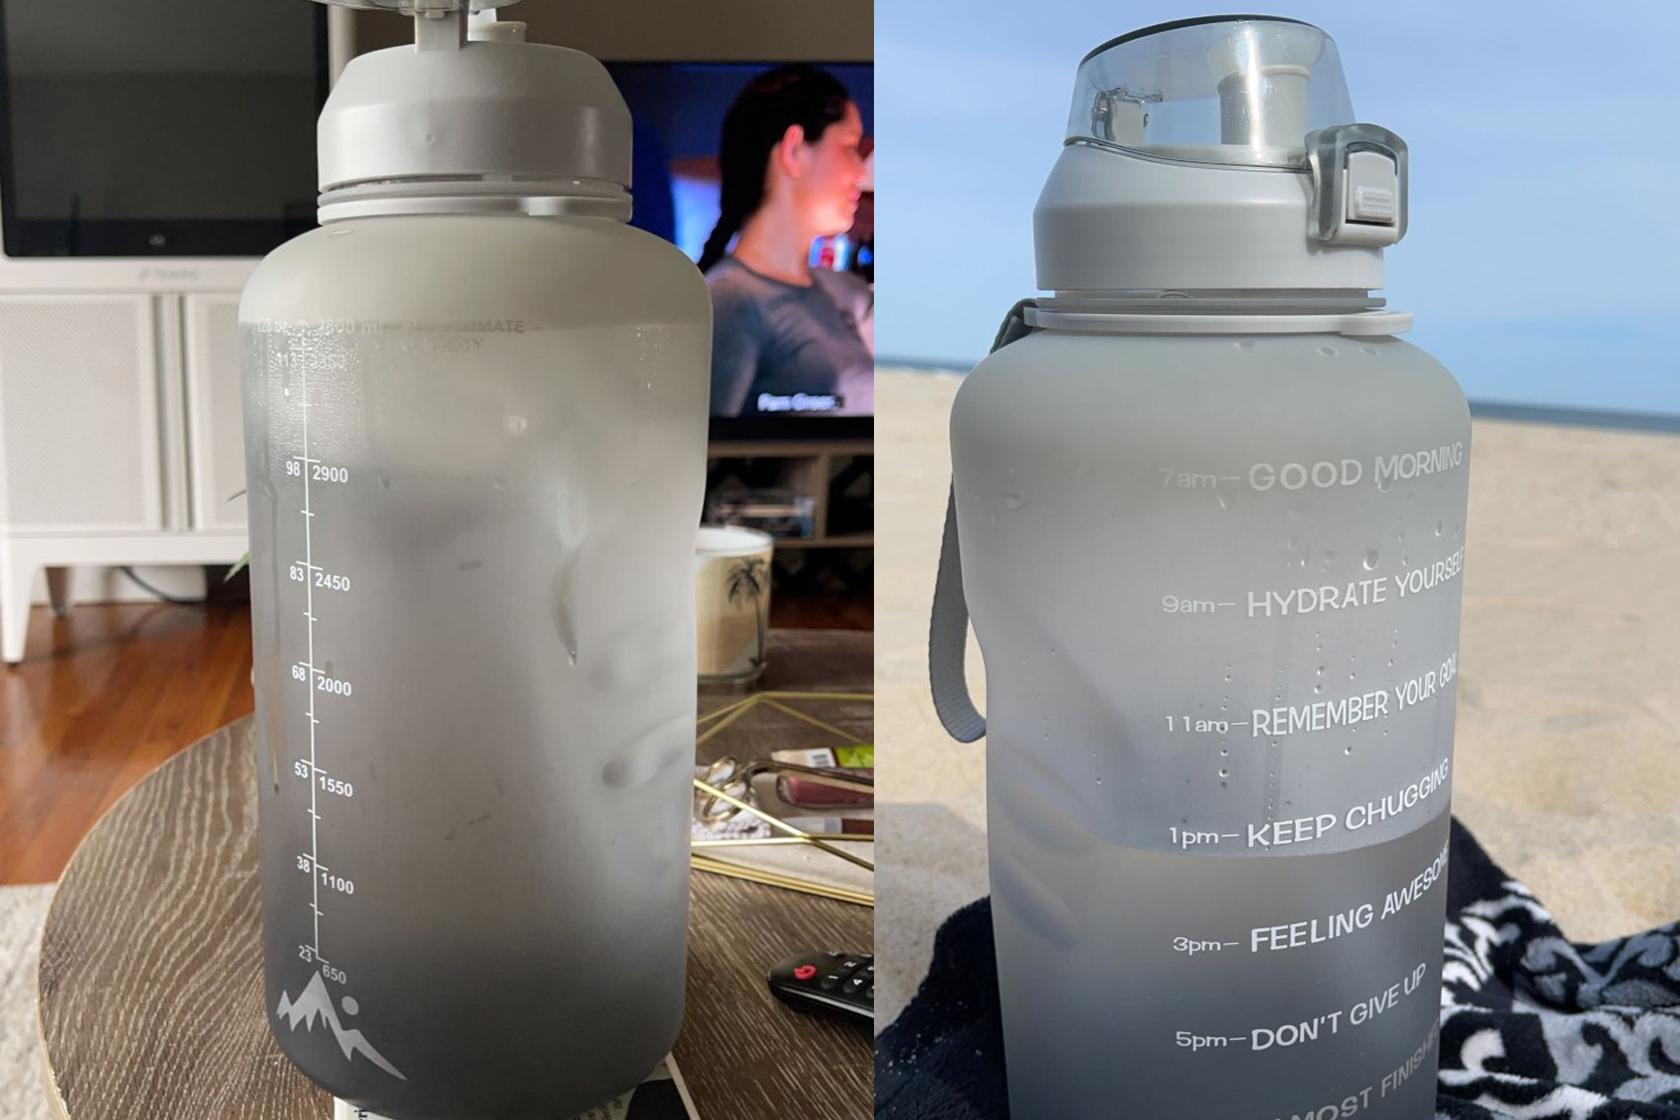 Got my gallon jug finally, thought people should know what $141.69